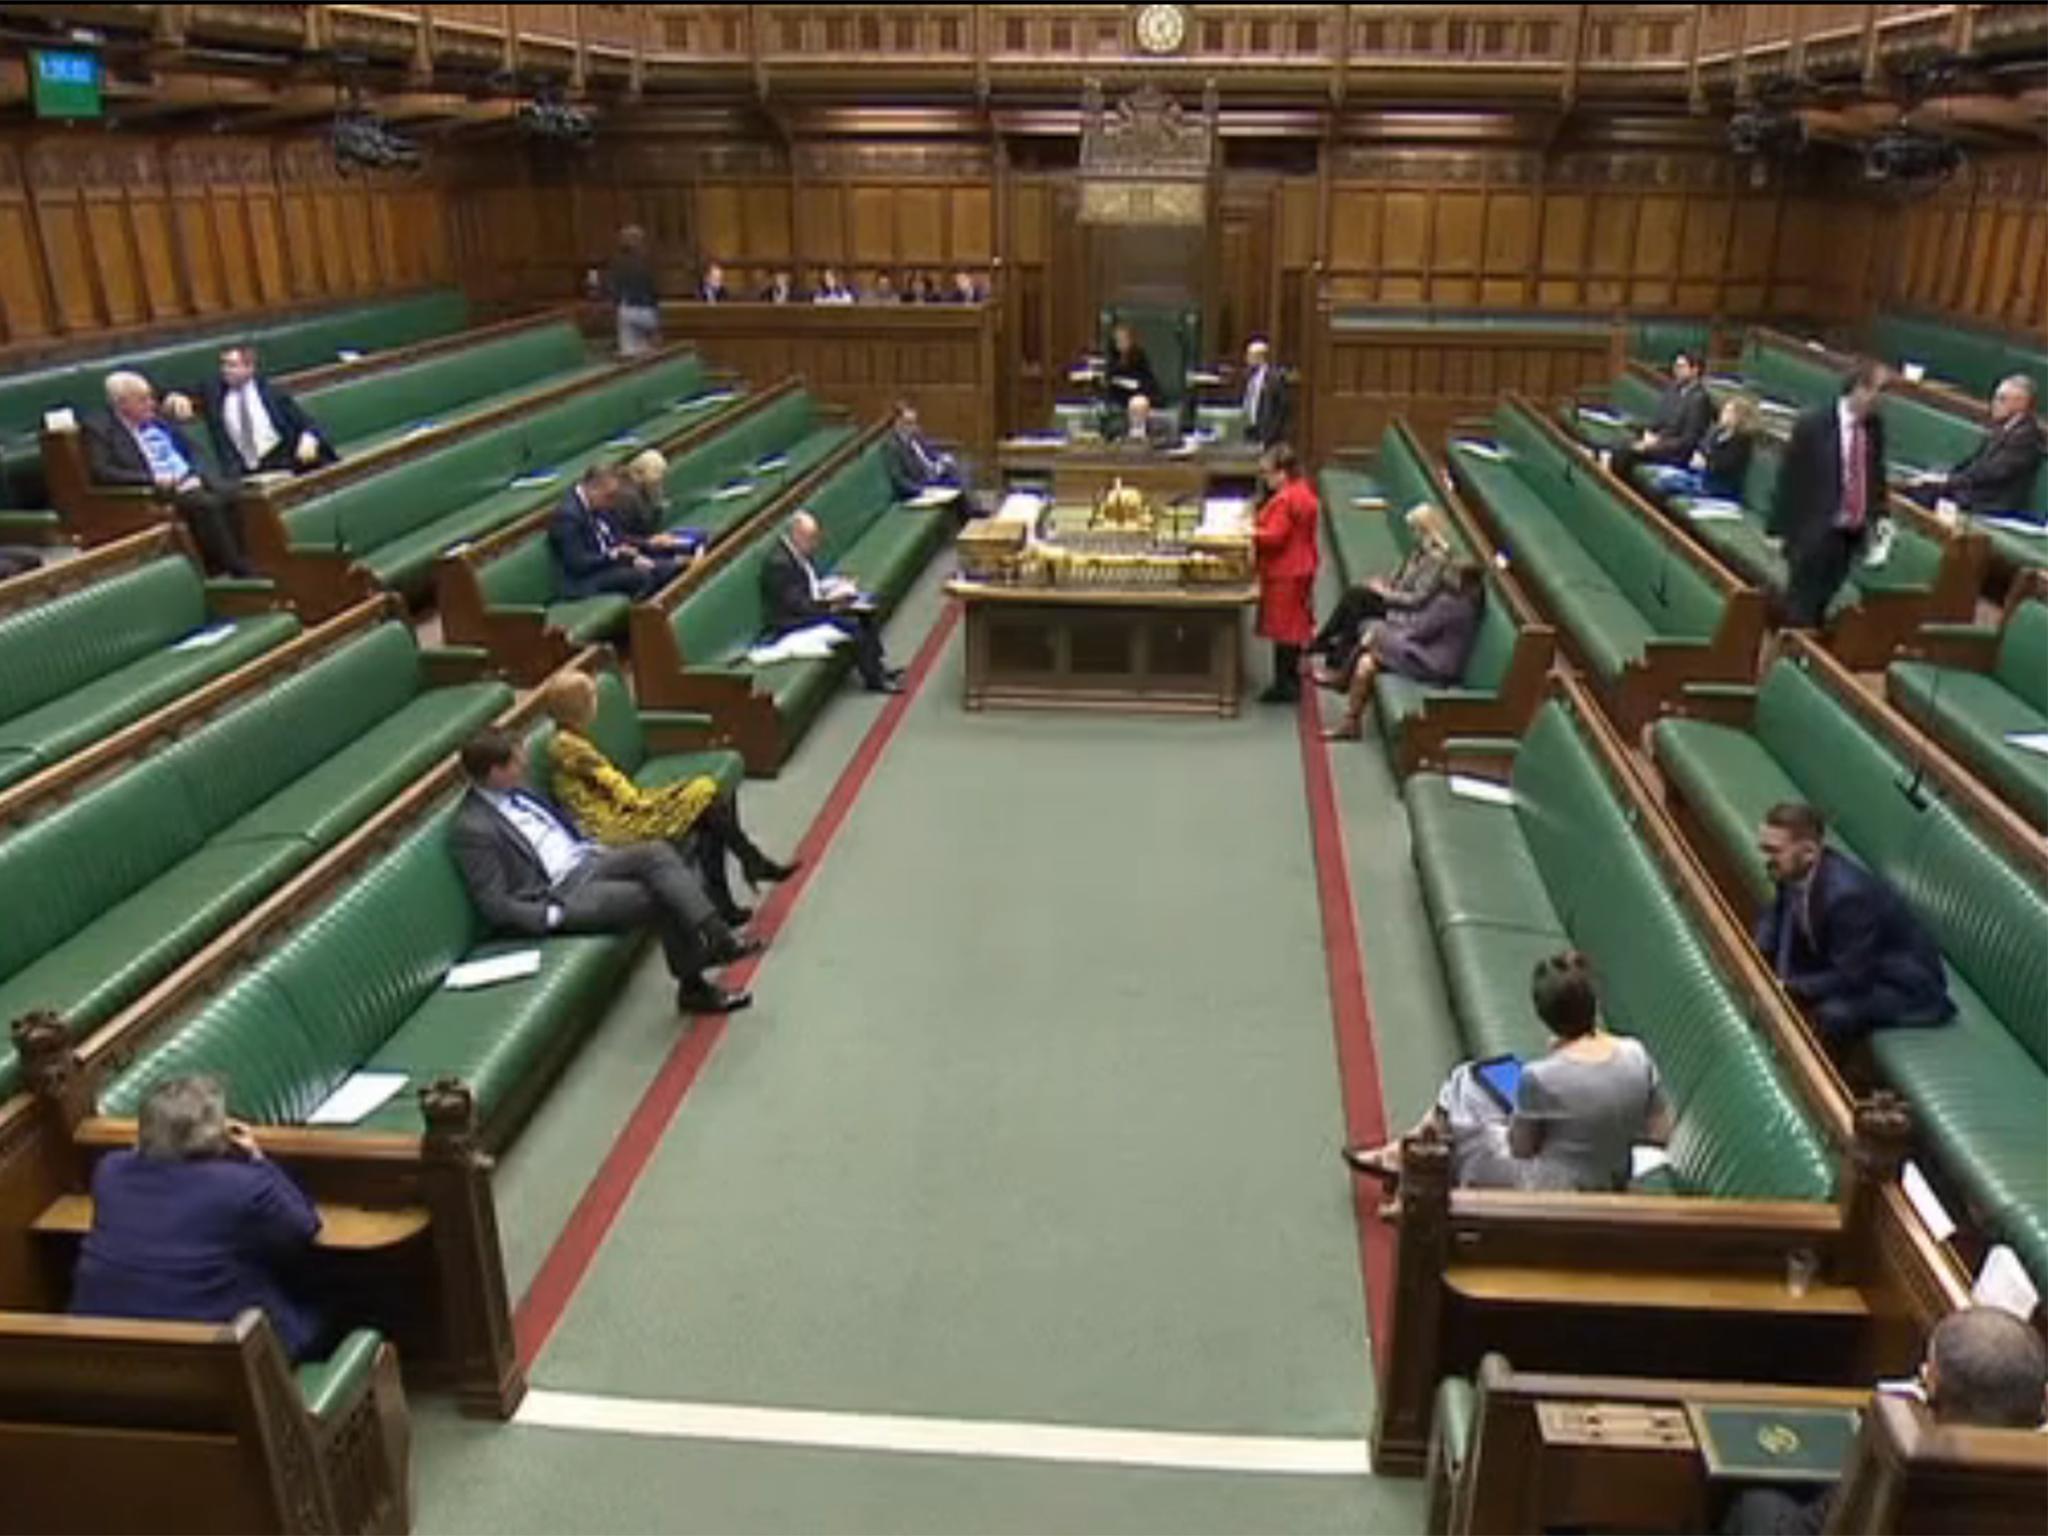 Only around 30 MPs attended the debate on the humanitarian crisis in Yemen